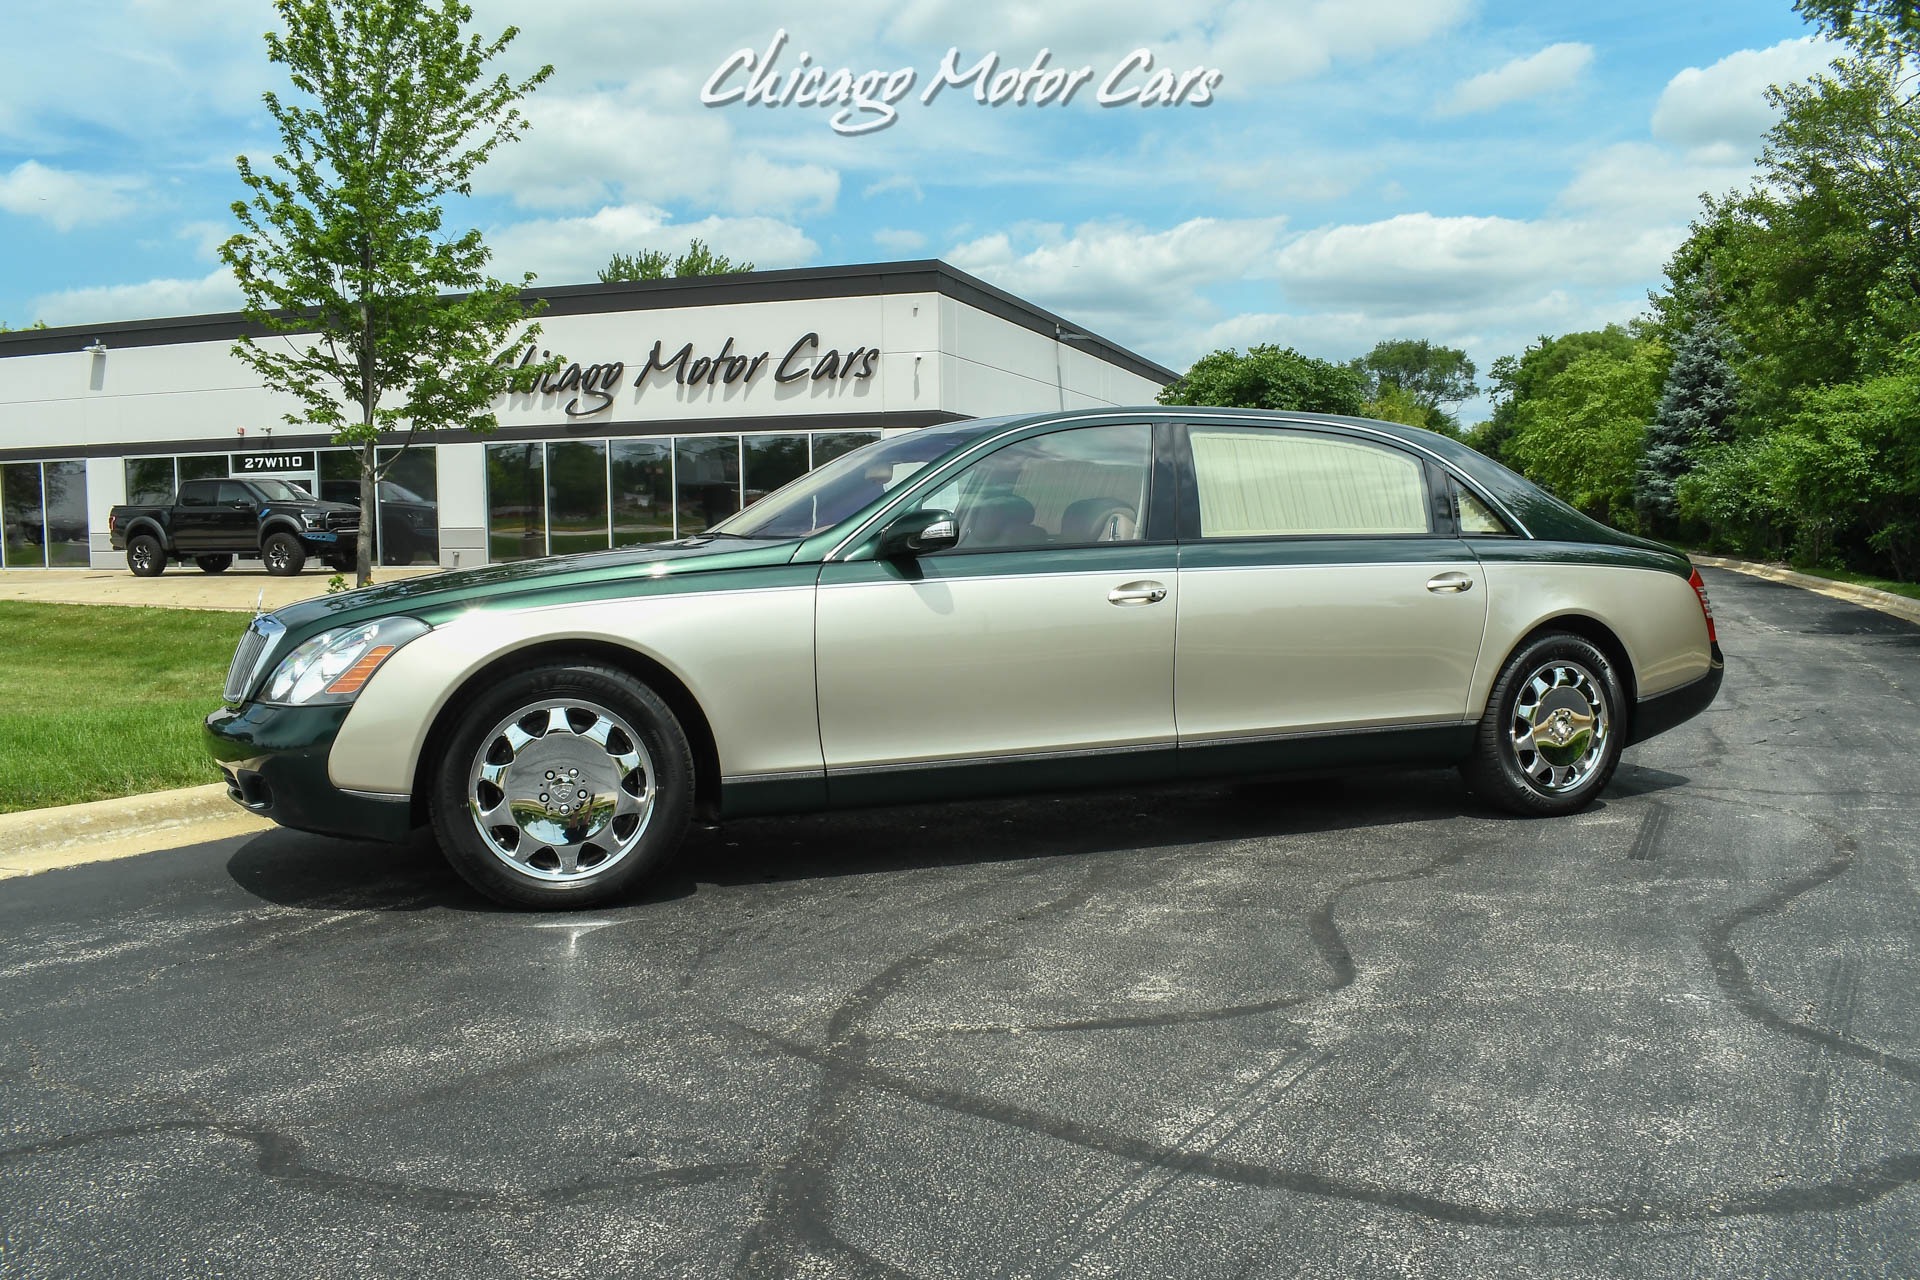 Used 2004 Maybach 62 PANO ROOF! DUO-TONE! REAR WINDOW CURTAINS! LOW MILES!  PRISTINE! For Sale (Special Pricing) | Chicago Motor Cars Stock #17882